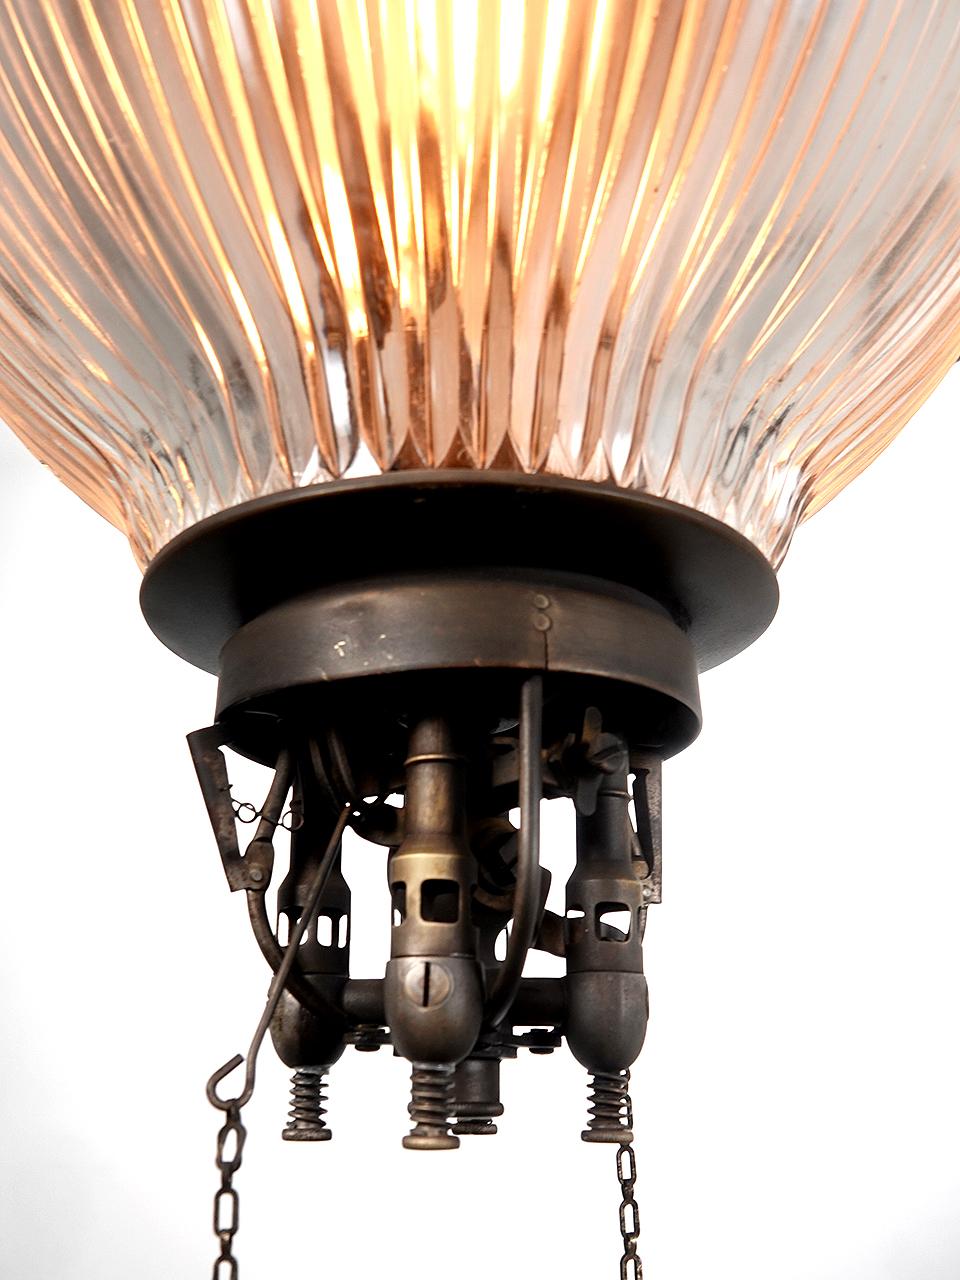 This is one of the more interesting industrial style lamps. The body is copper topped by a cast iron crown. Above that are two street light style electrical pickups in copper and white ceramic. The shade is a large 20 inch diameter with a green over